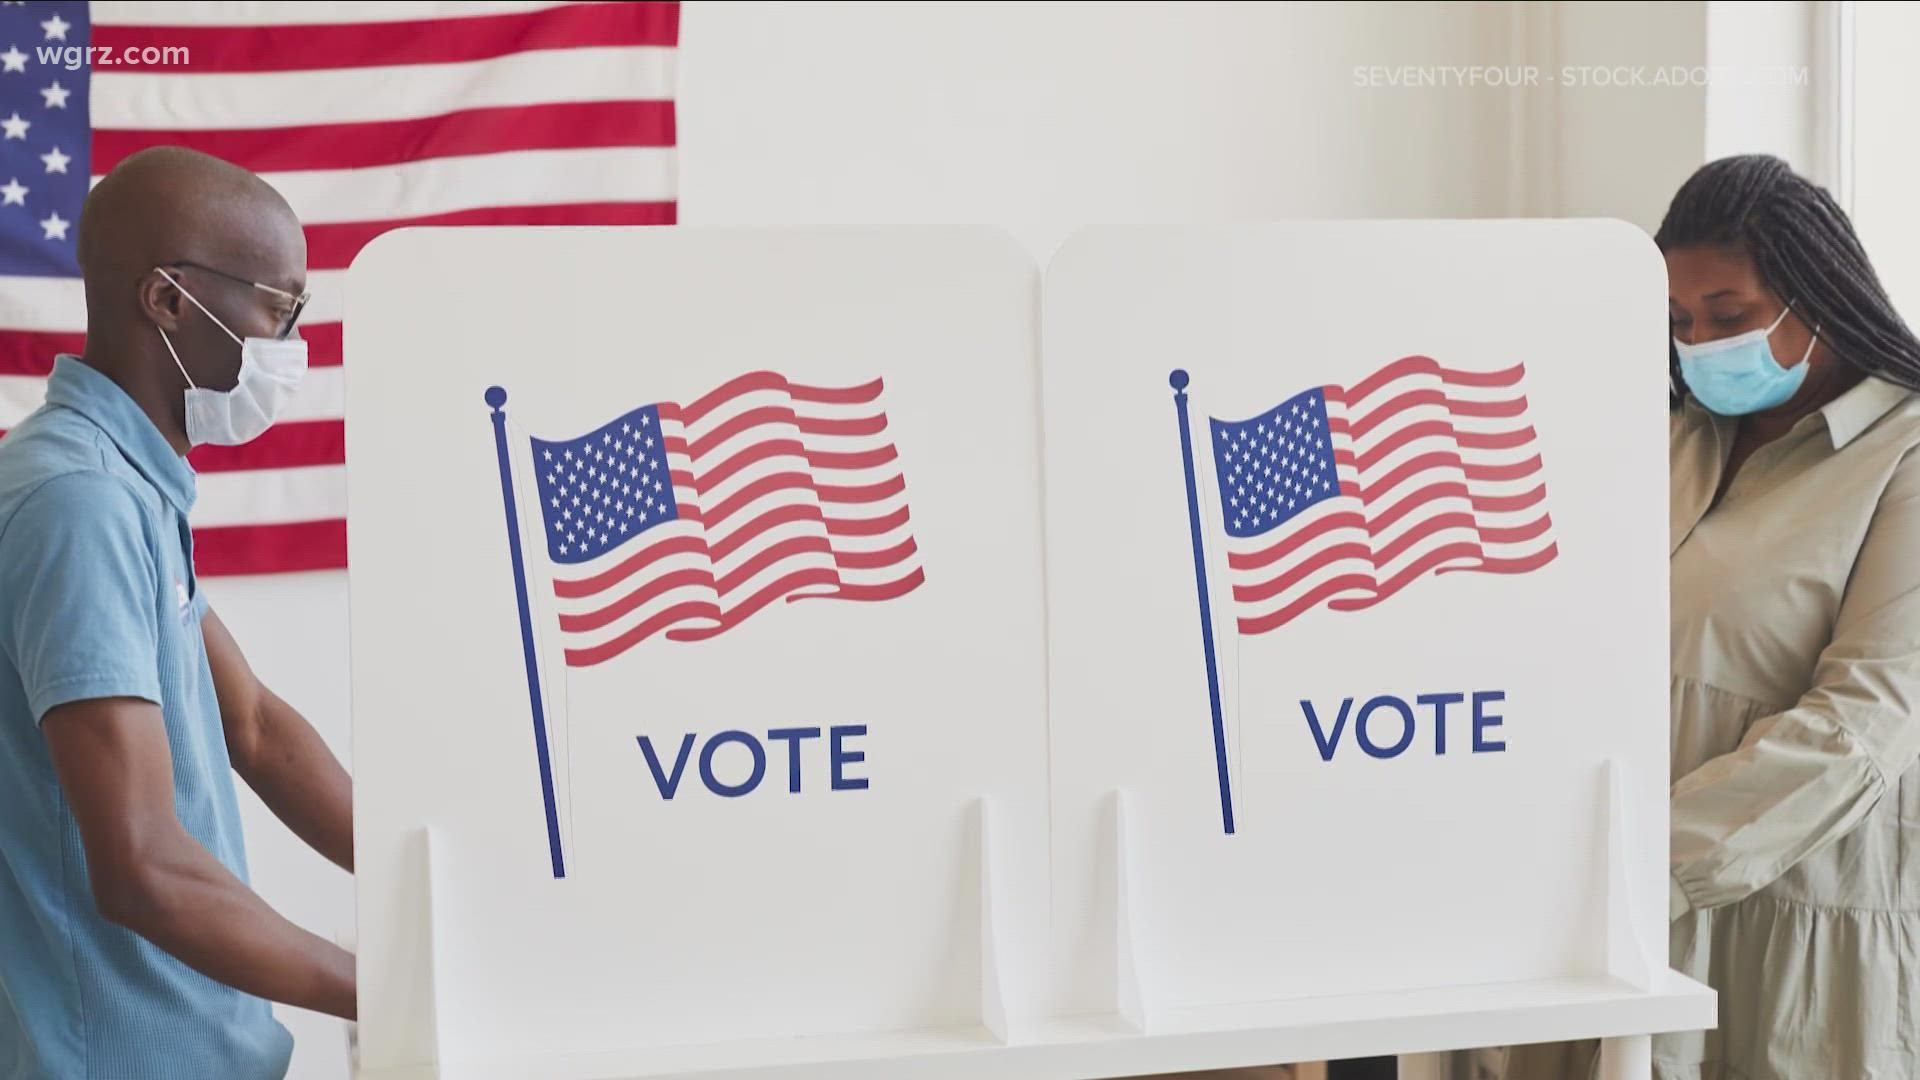 National voter registration day is today